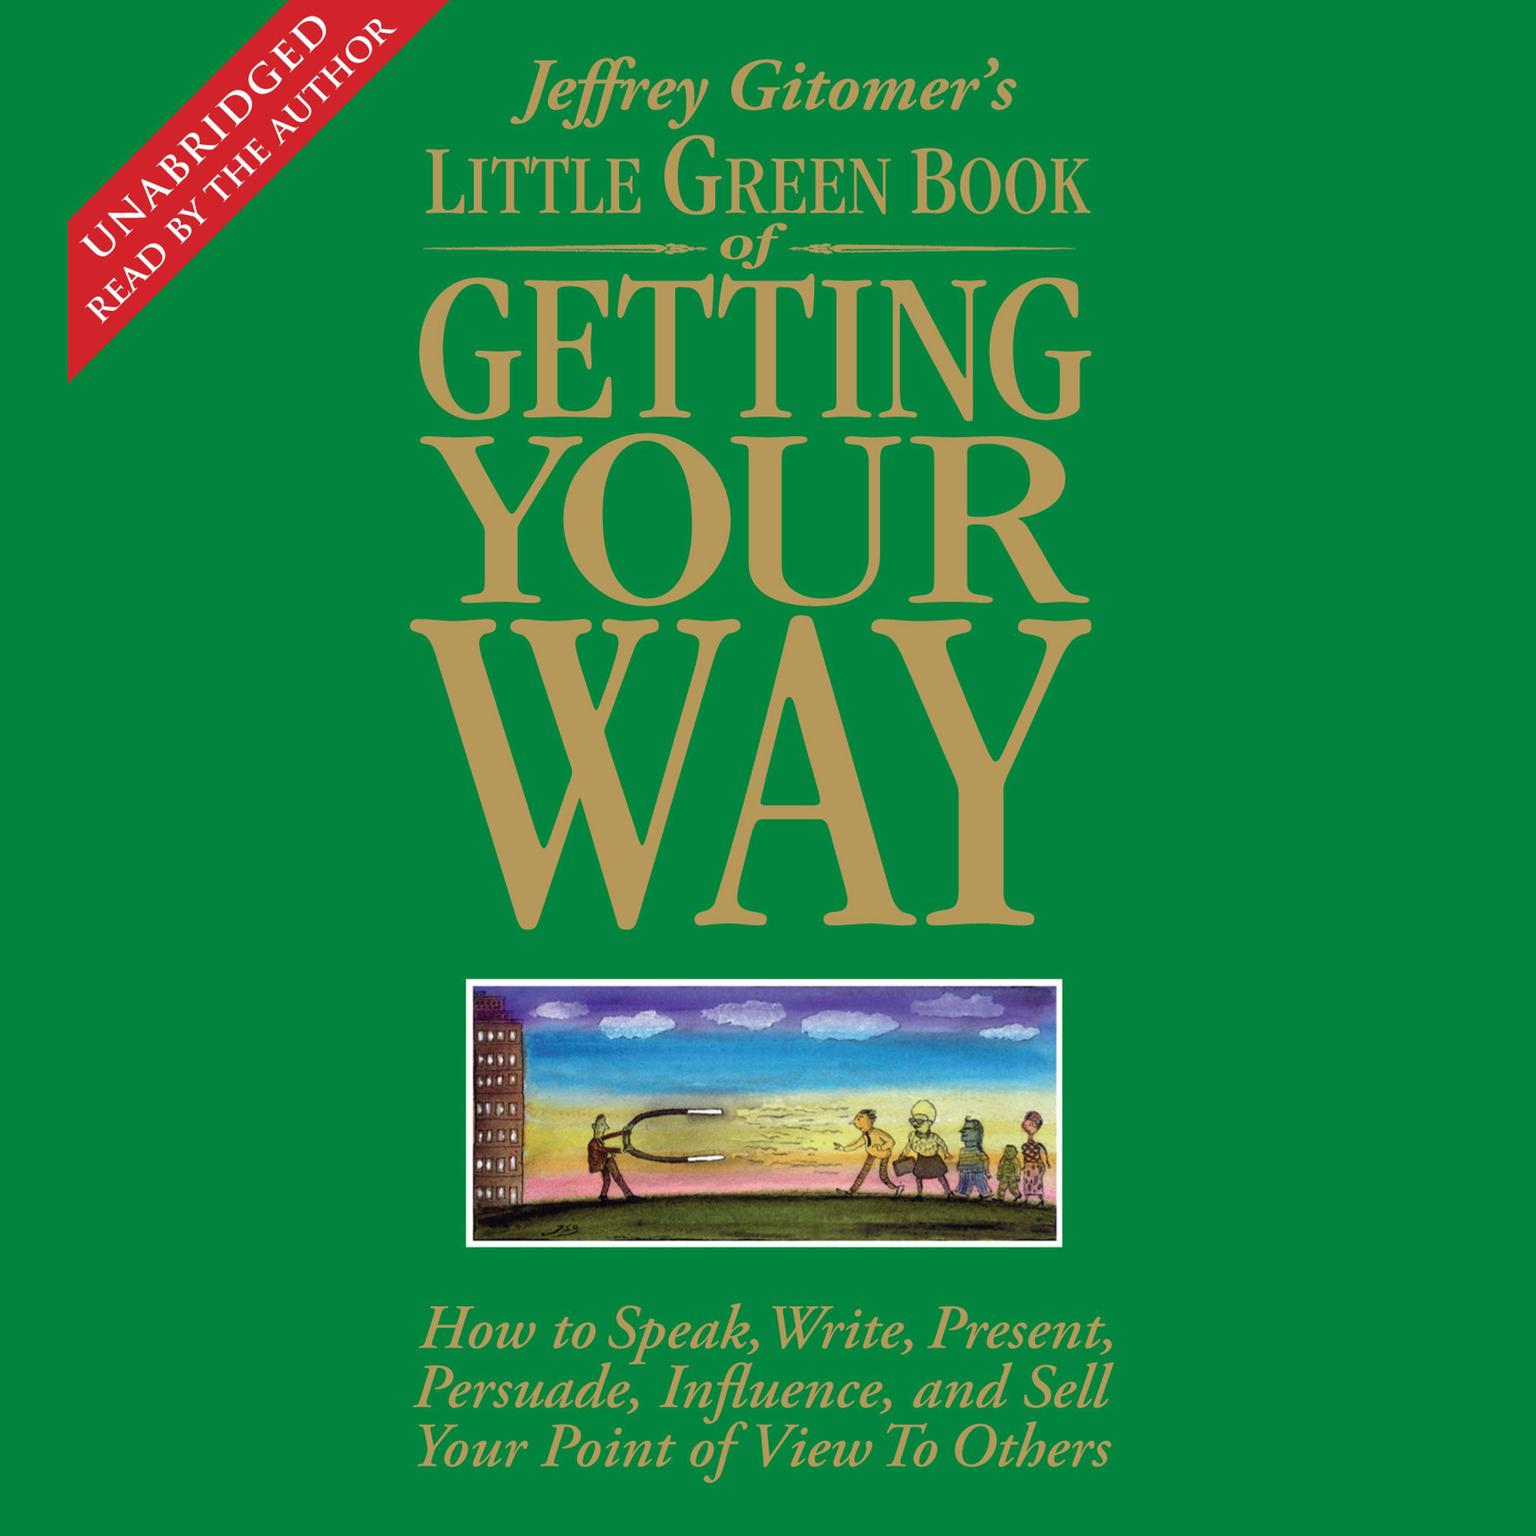 The Little Green Book of Getting Your Way: How to Speak, Write, Present, Persuade, Influence, and Sell Your Point of View to Others Audiobook, by Jeffrey Gitomer